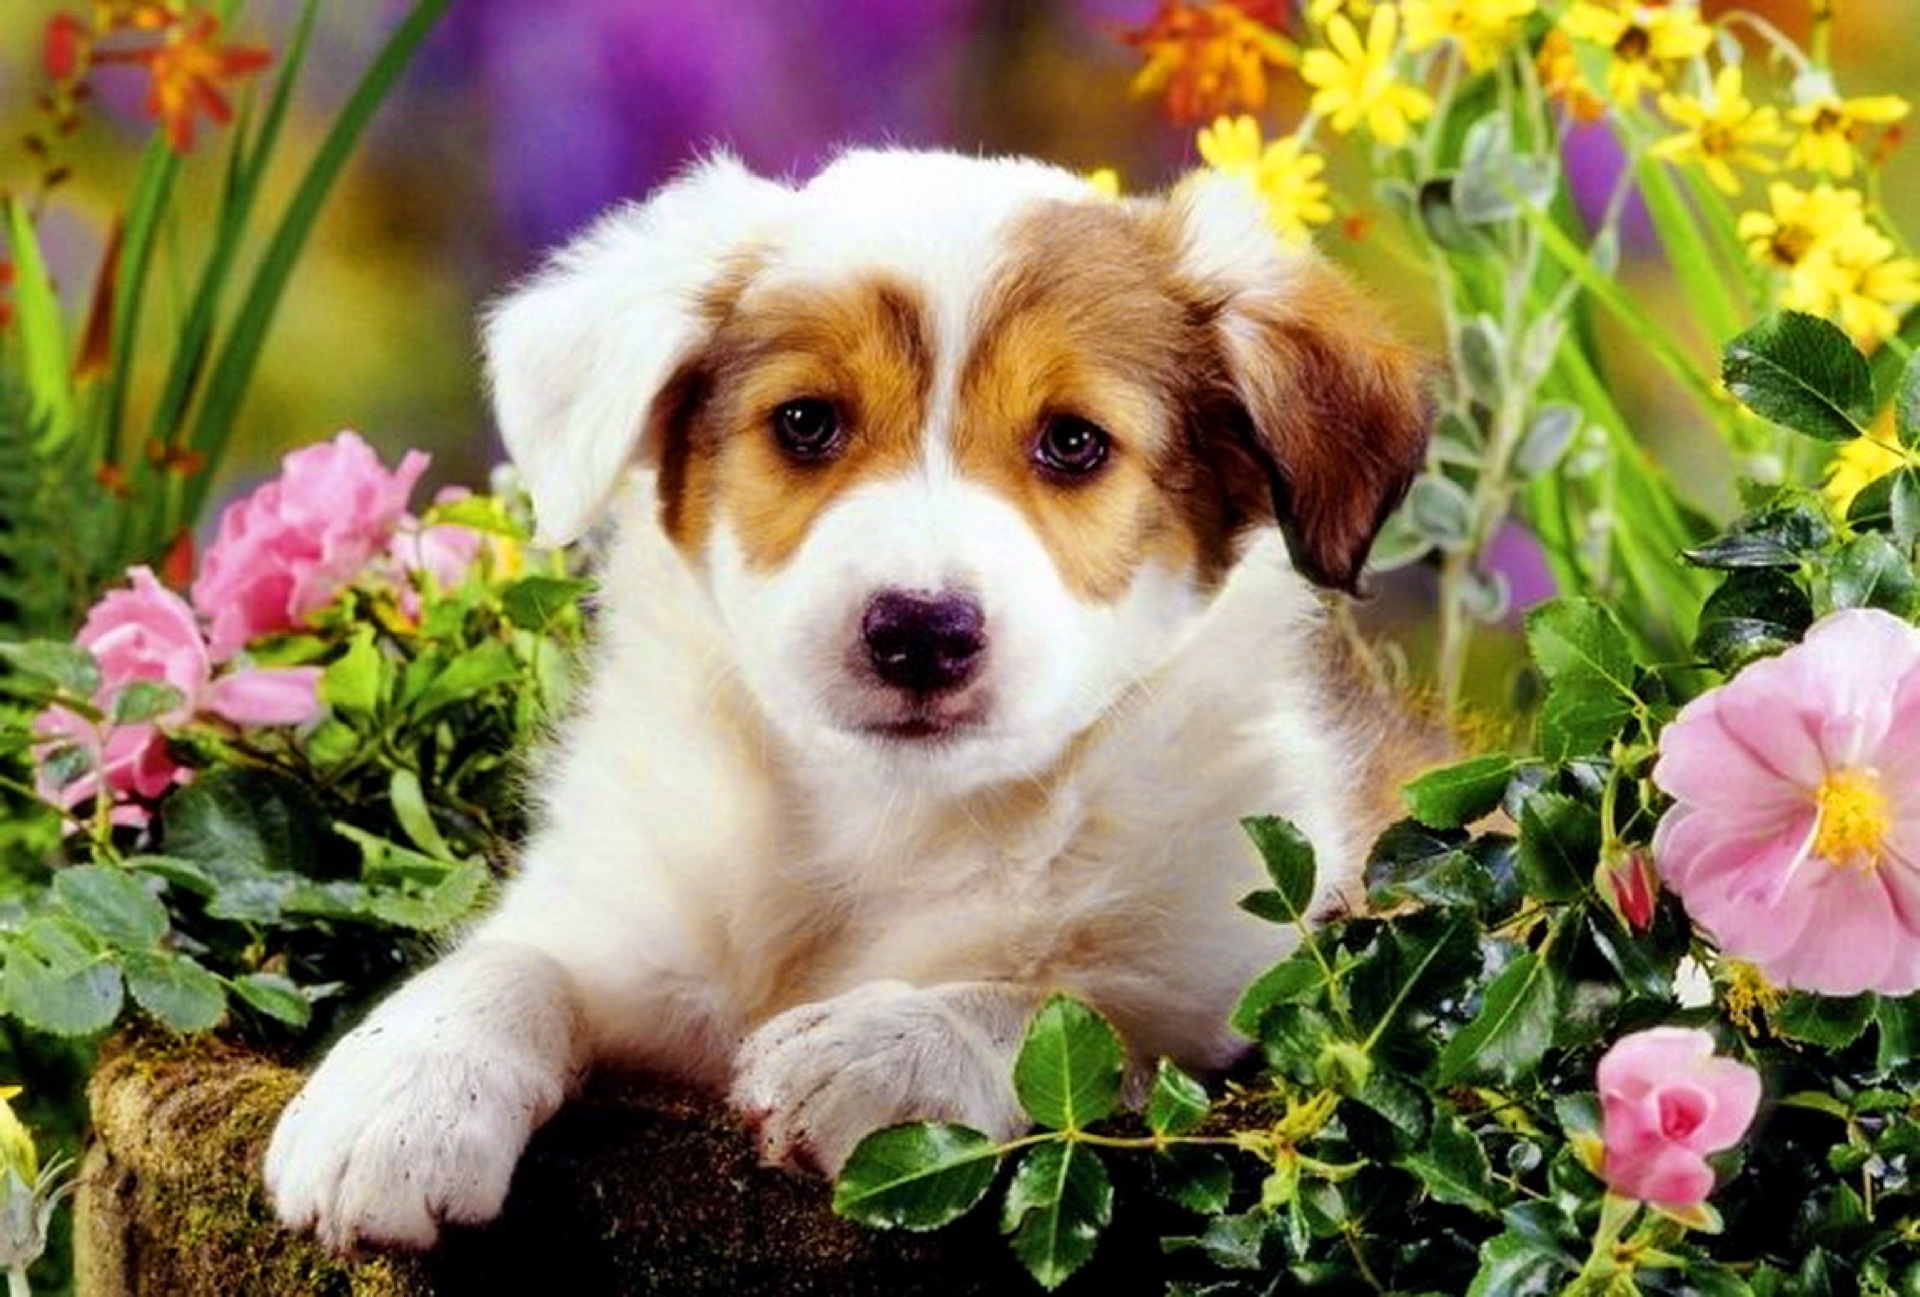 Free download cute puppies in spring flowers Car Tuning [1920x1297] for your Desktop, Mobile & Tablet. Explore Golden Retriever Easter Wallpaper. Easter Golden Retriever Wallpaper, Golden Retriever Easter Wallpaper